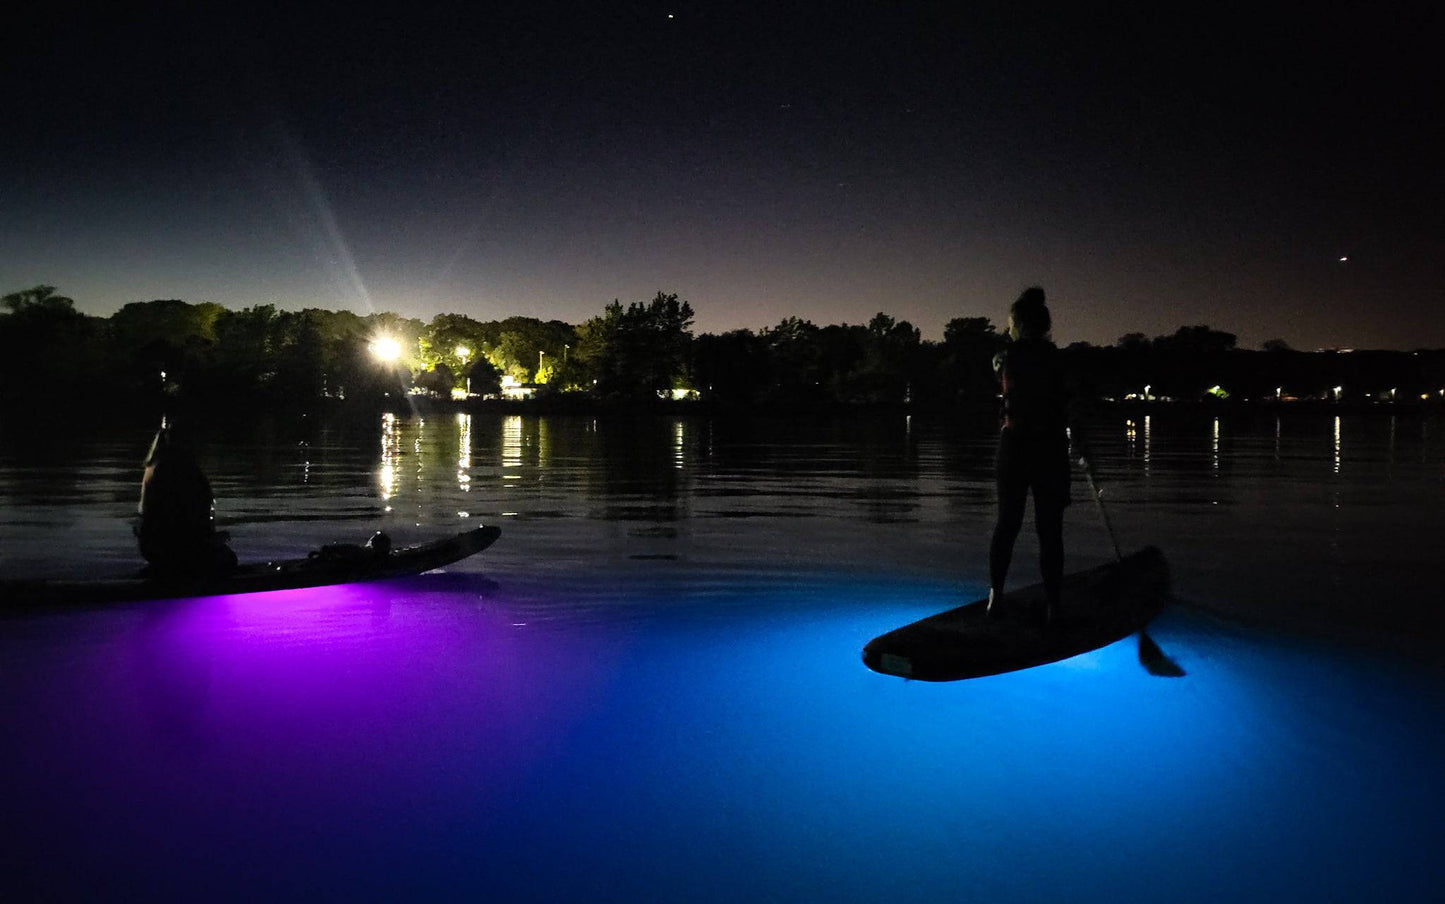 Two friends enjoy a night SUP together with bright paddleboard lights illuminating the water below their SUPs.